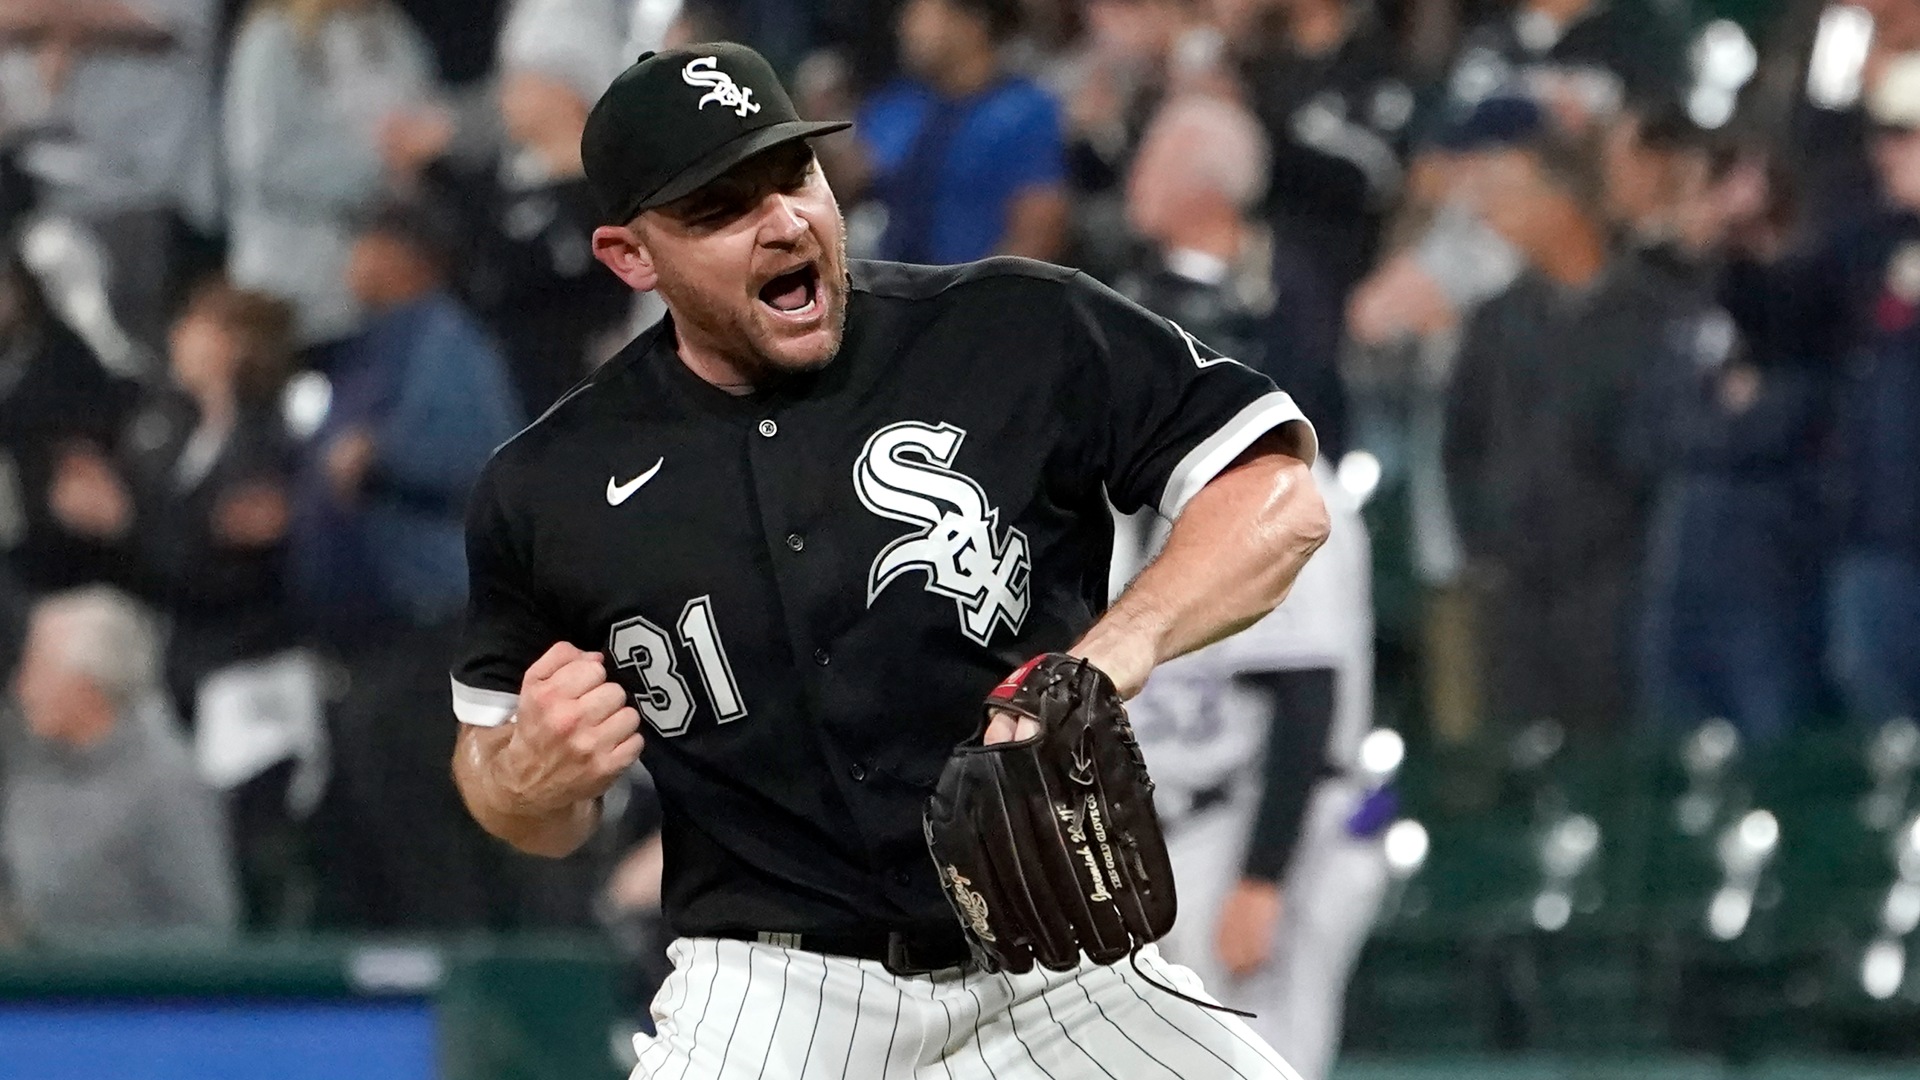 Sox Watch: Best Opening Days in White Sox History, by Chicago White Sox